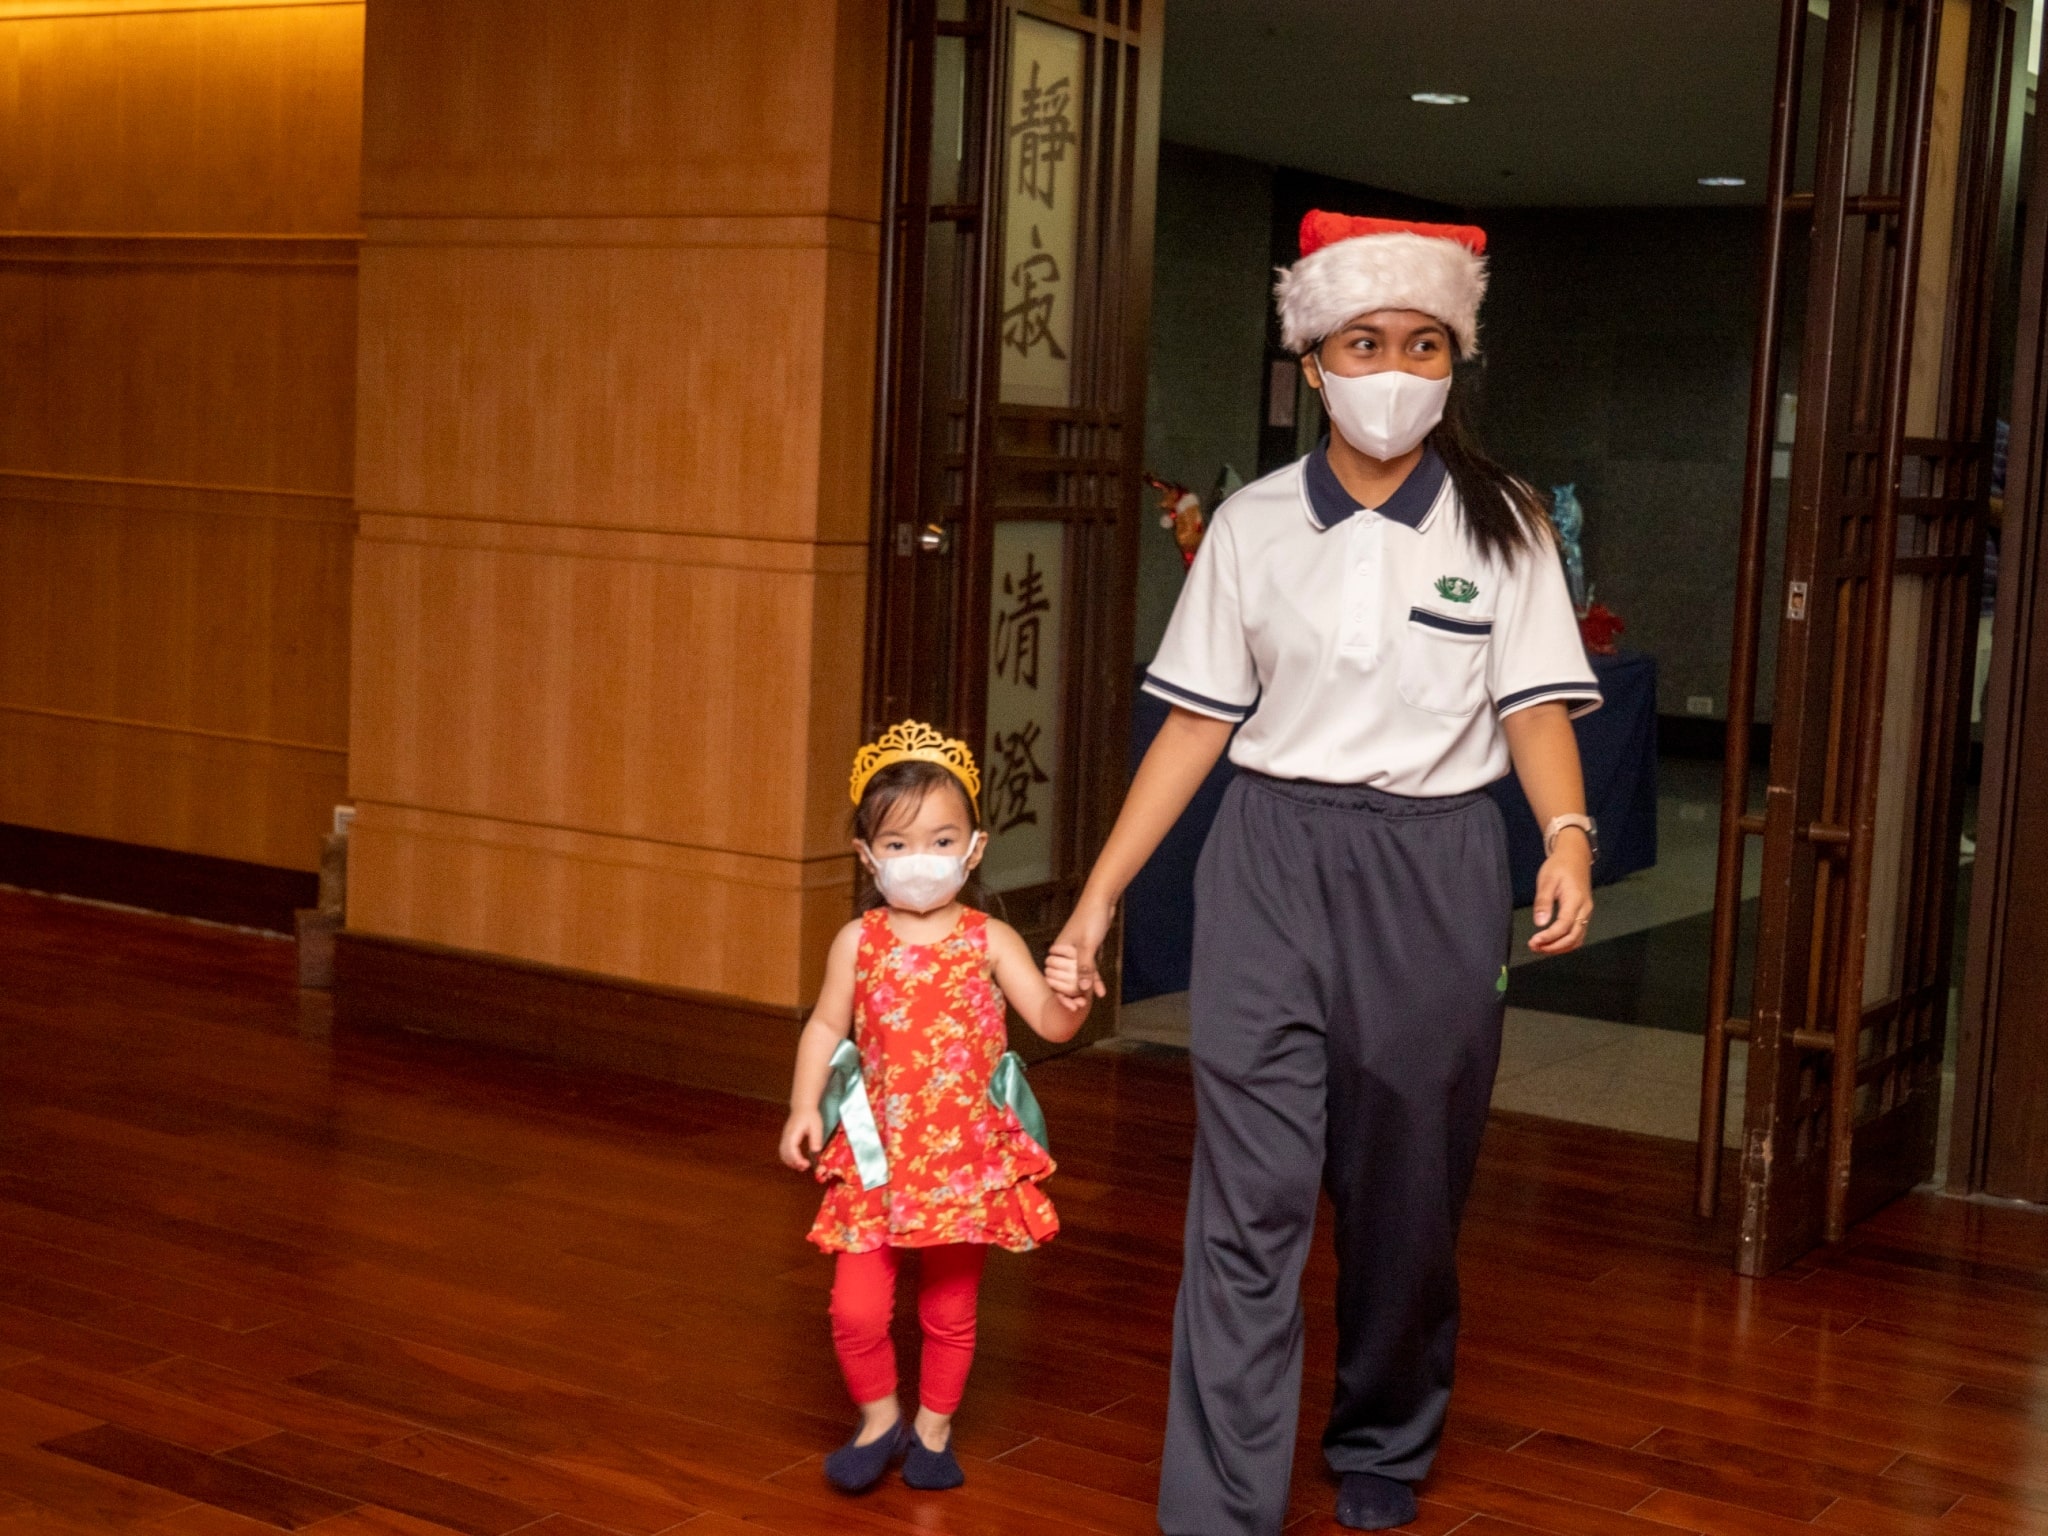 Teacher Christine Pauline Paje guides a student in her entry to the Jing Si Hall. 【Photo by Harold Alzaga】